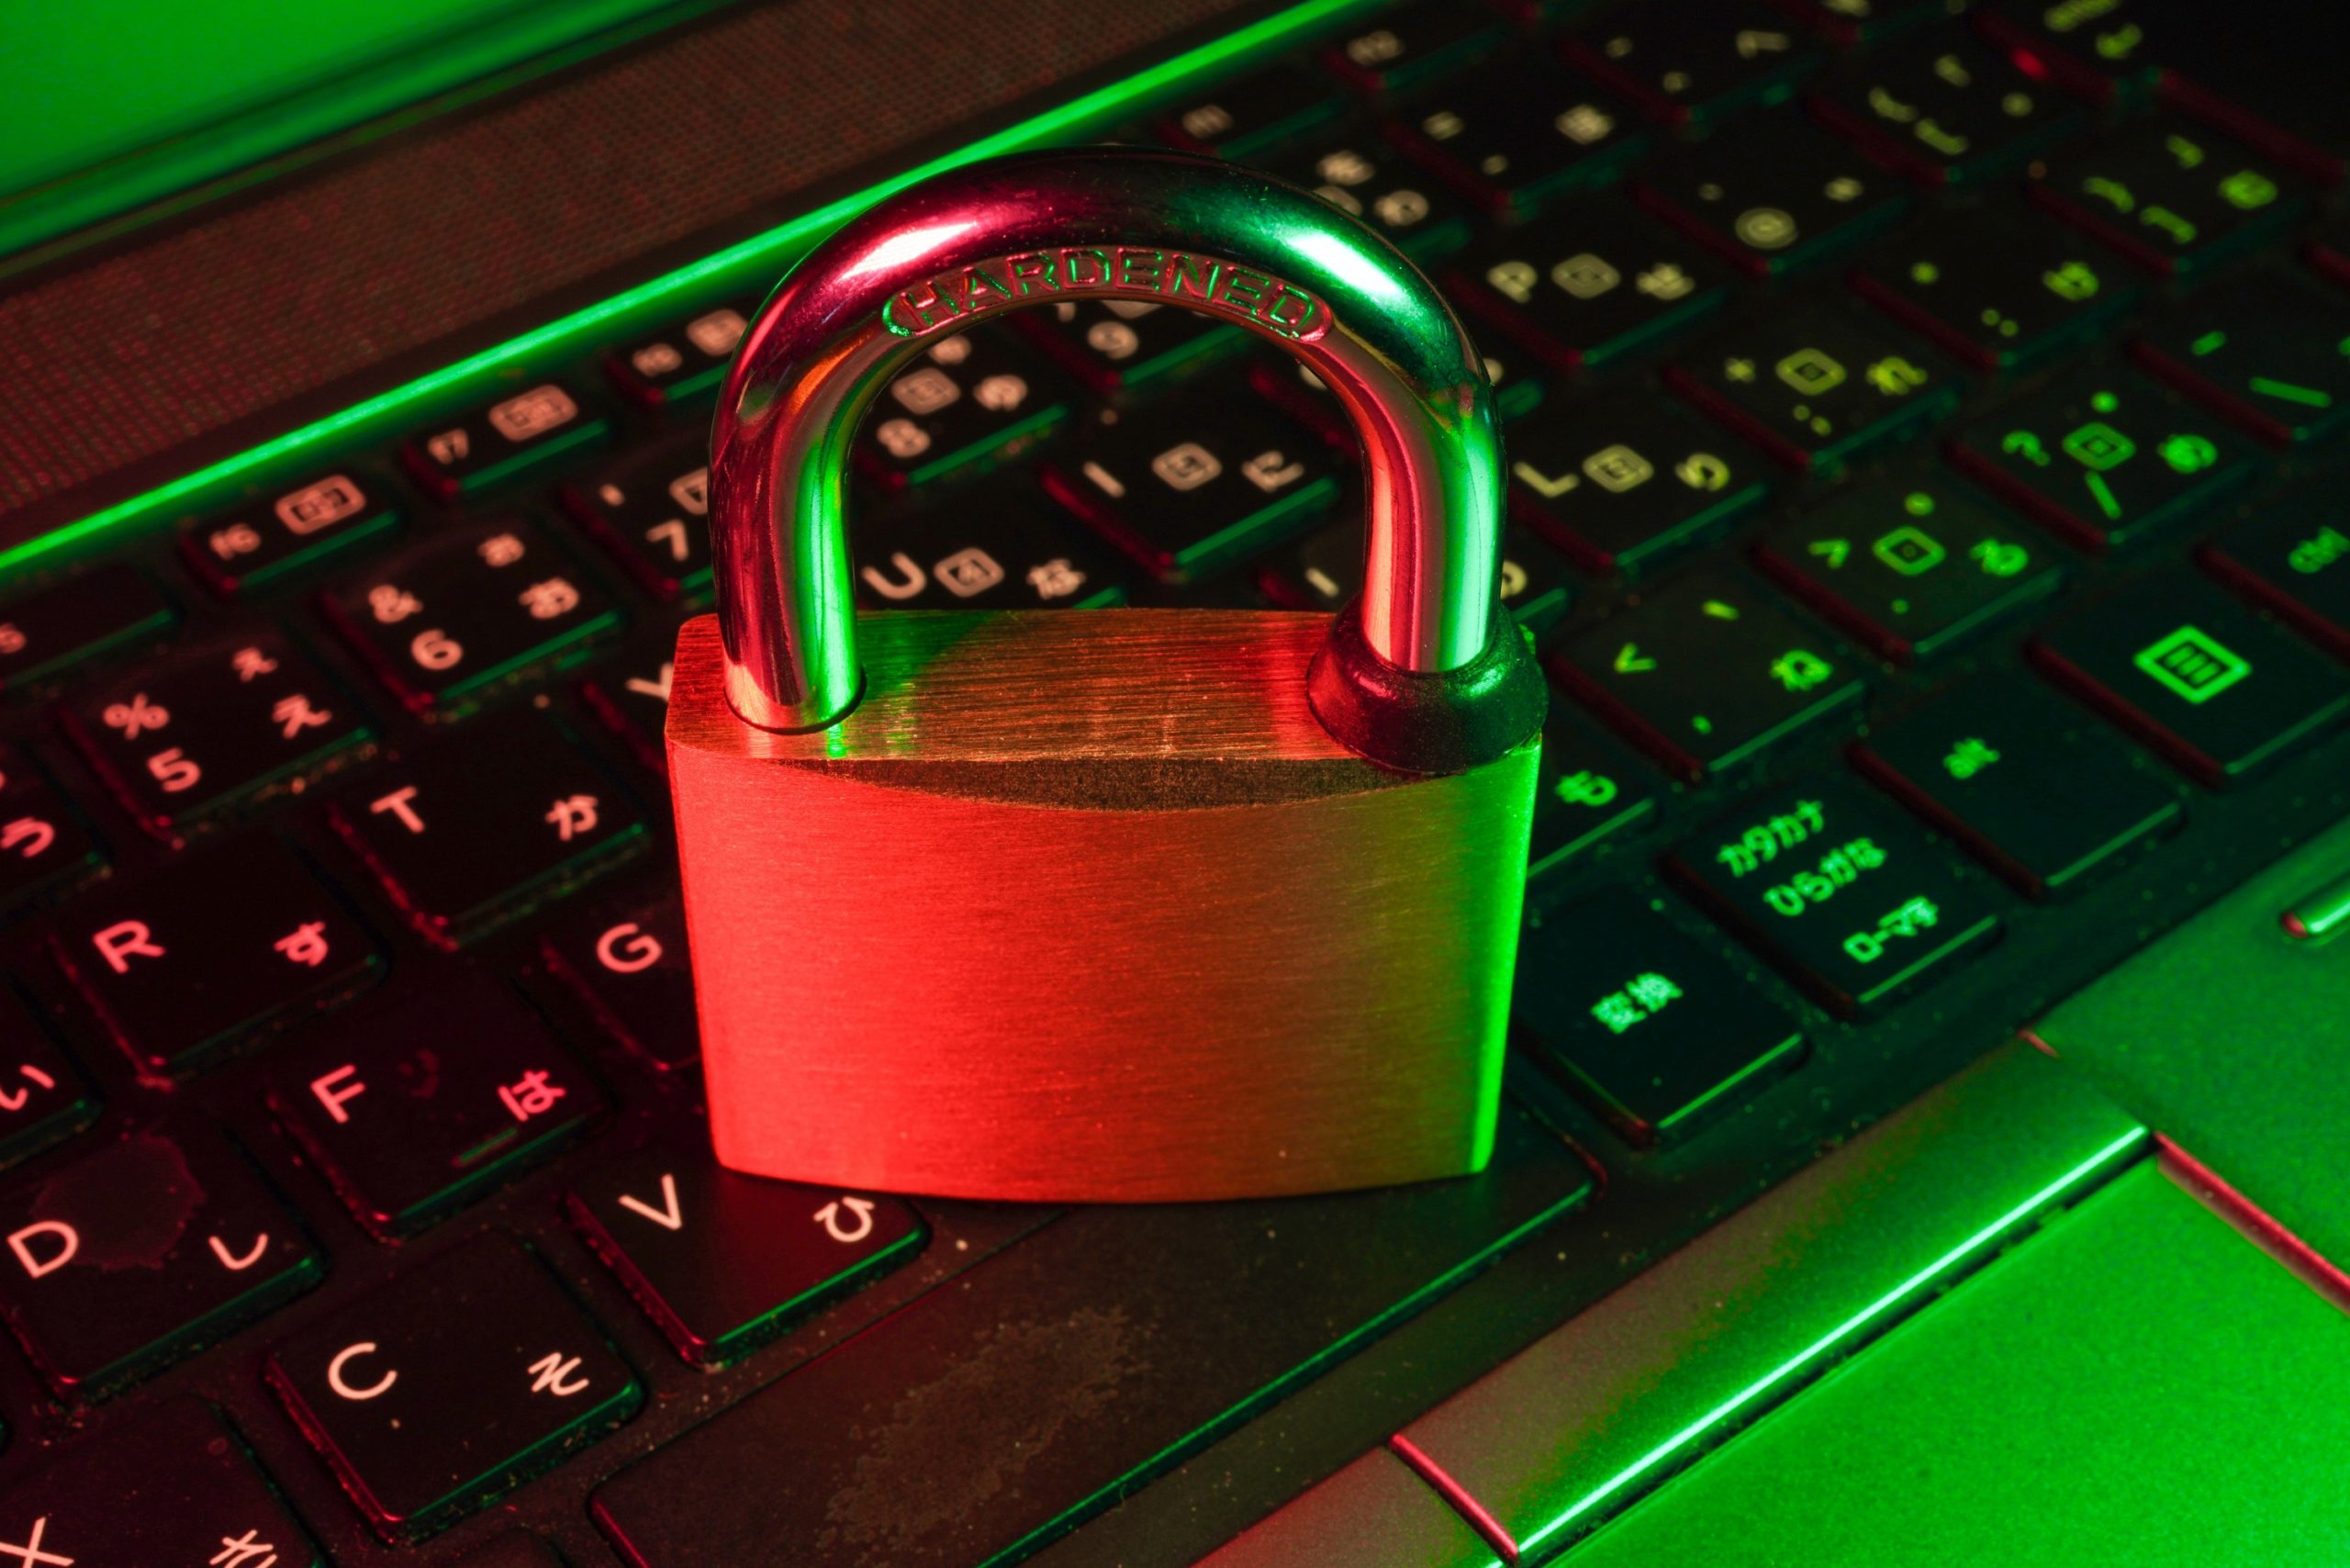 How organizations can prevent data security breach?